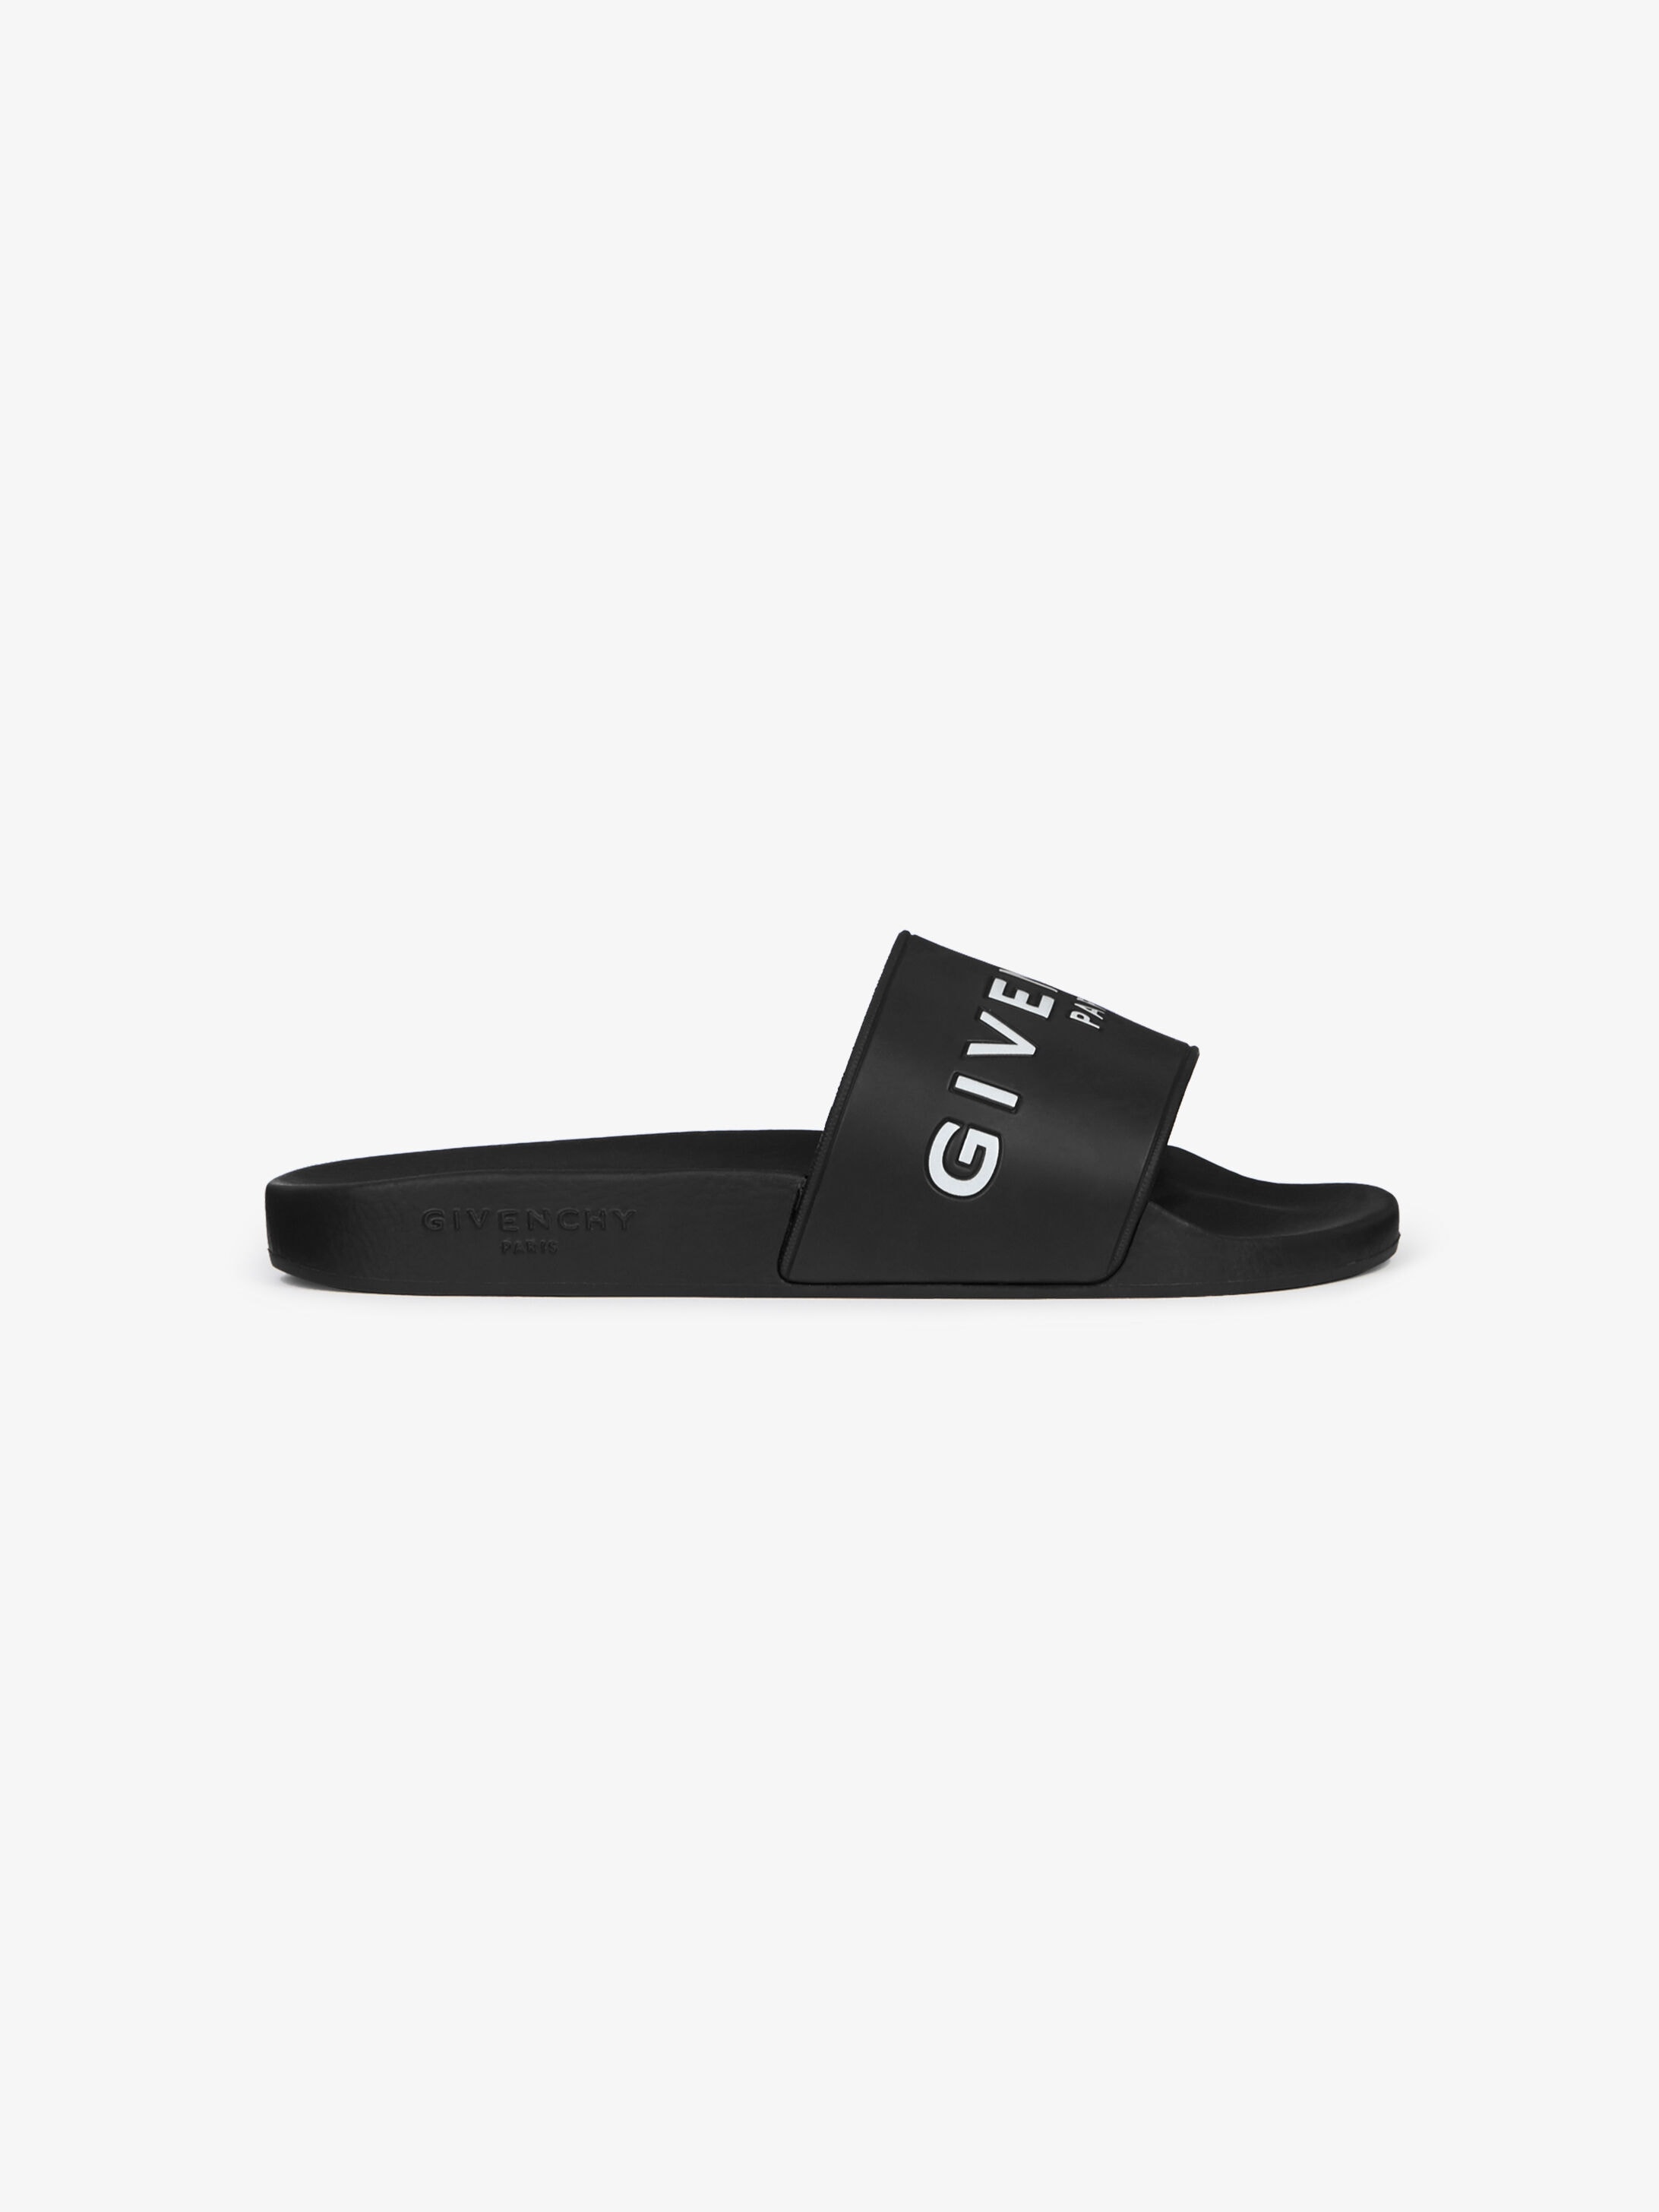 givenchy slippers women's